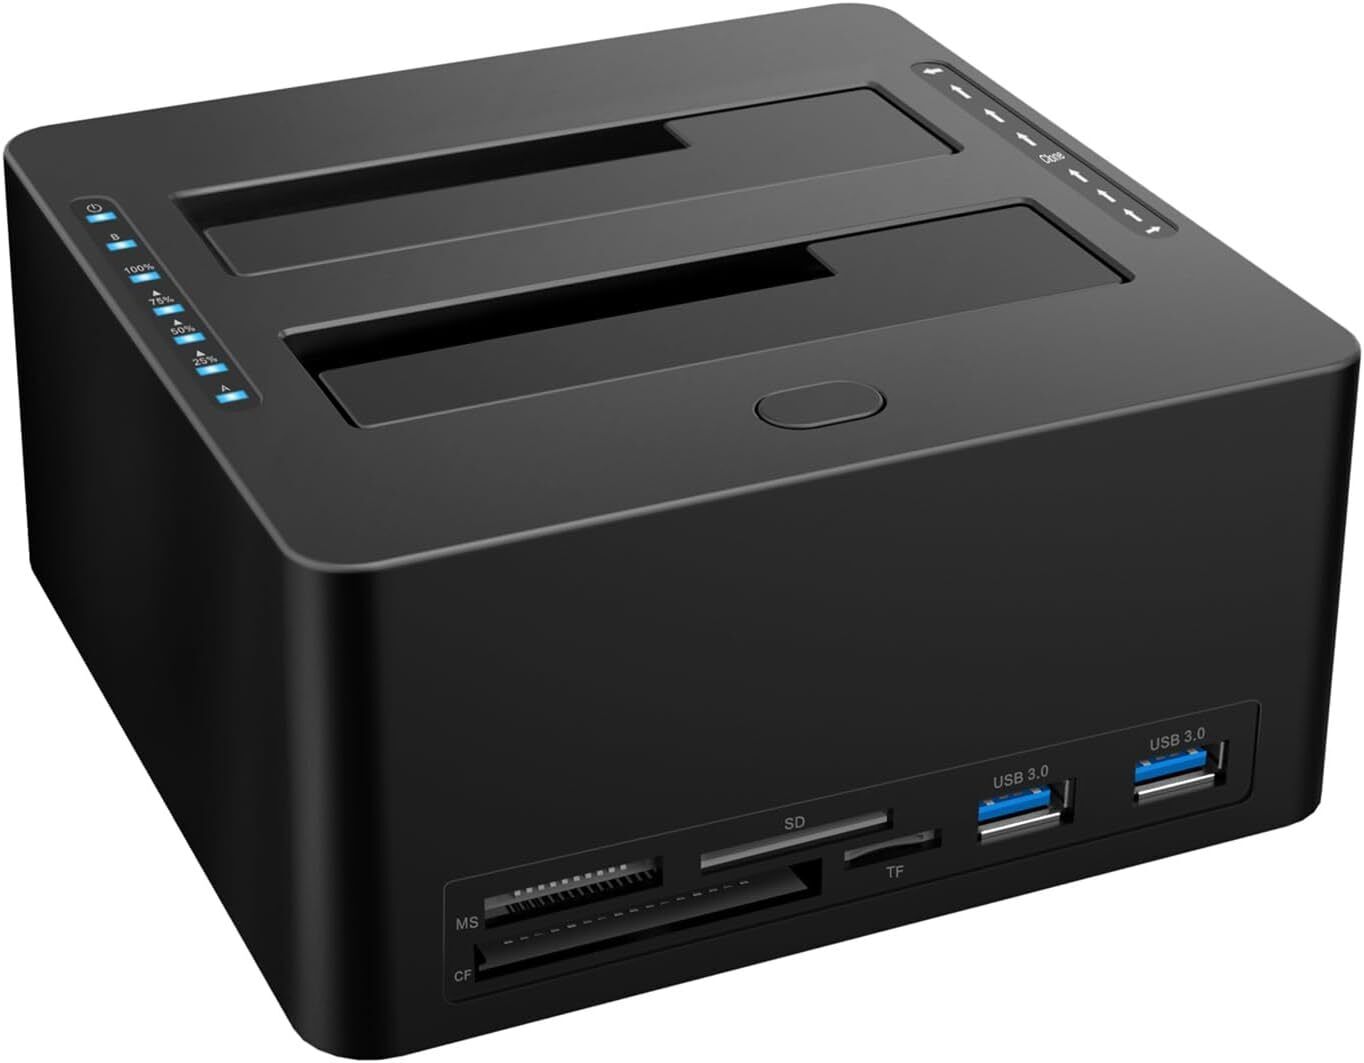 SATA to USB 3.0 Dual-Bay Hard Drive Docking Station for 2.5 & 3.5-inch HDD/SSD